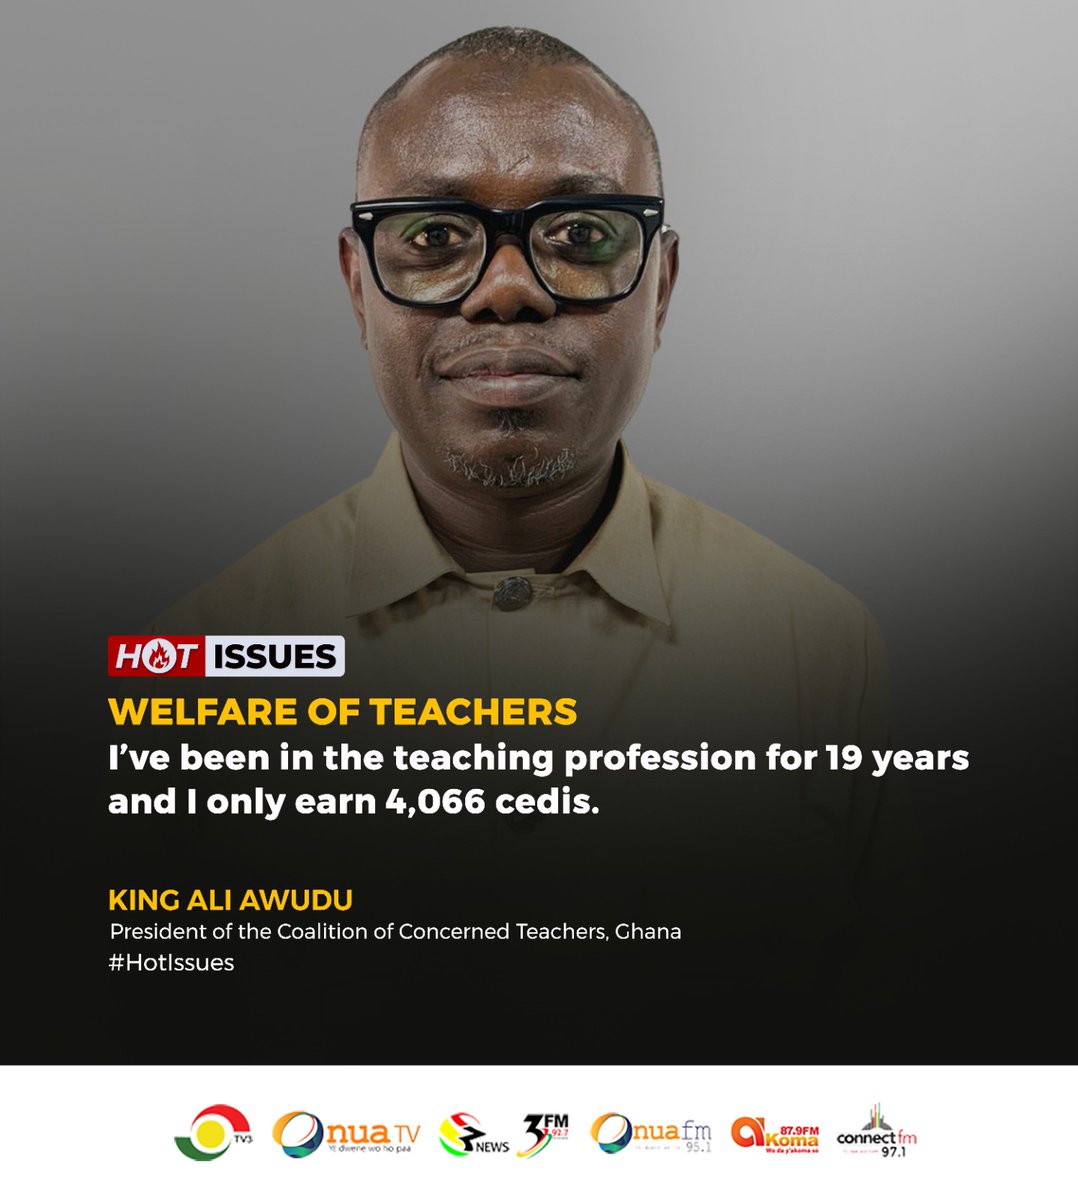 I've been in the teaching service for 19 years on the rank of assistant director 1 and I earn GHc4,066 - King Ali Awudu, President, Coalition of Concerned Teachers #HotIssues #3NewsGH